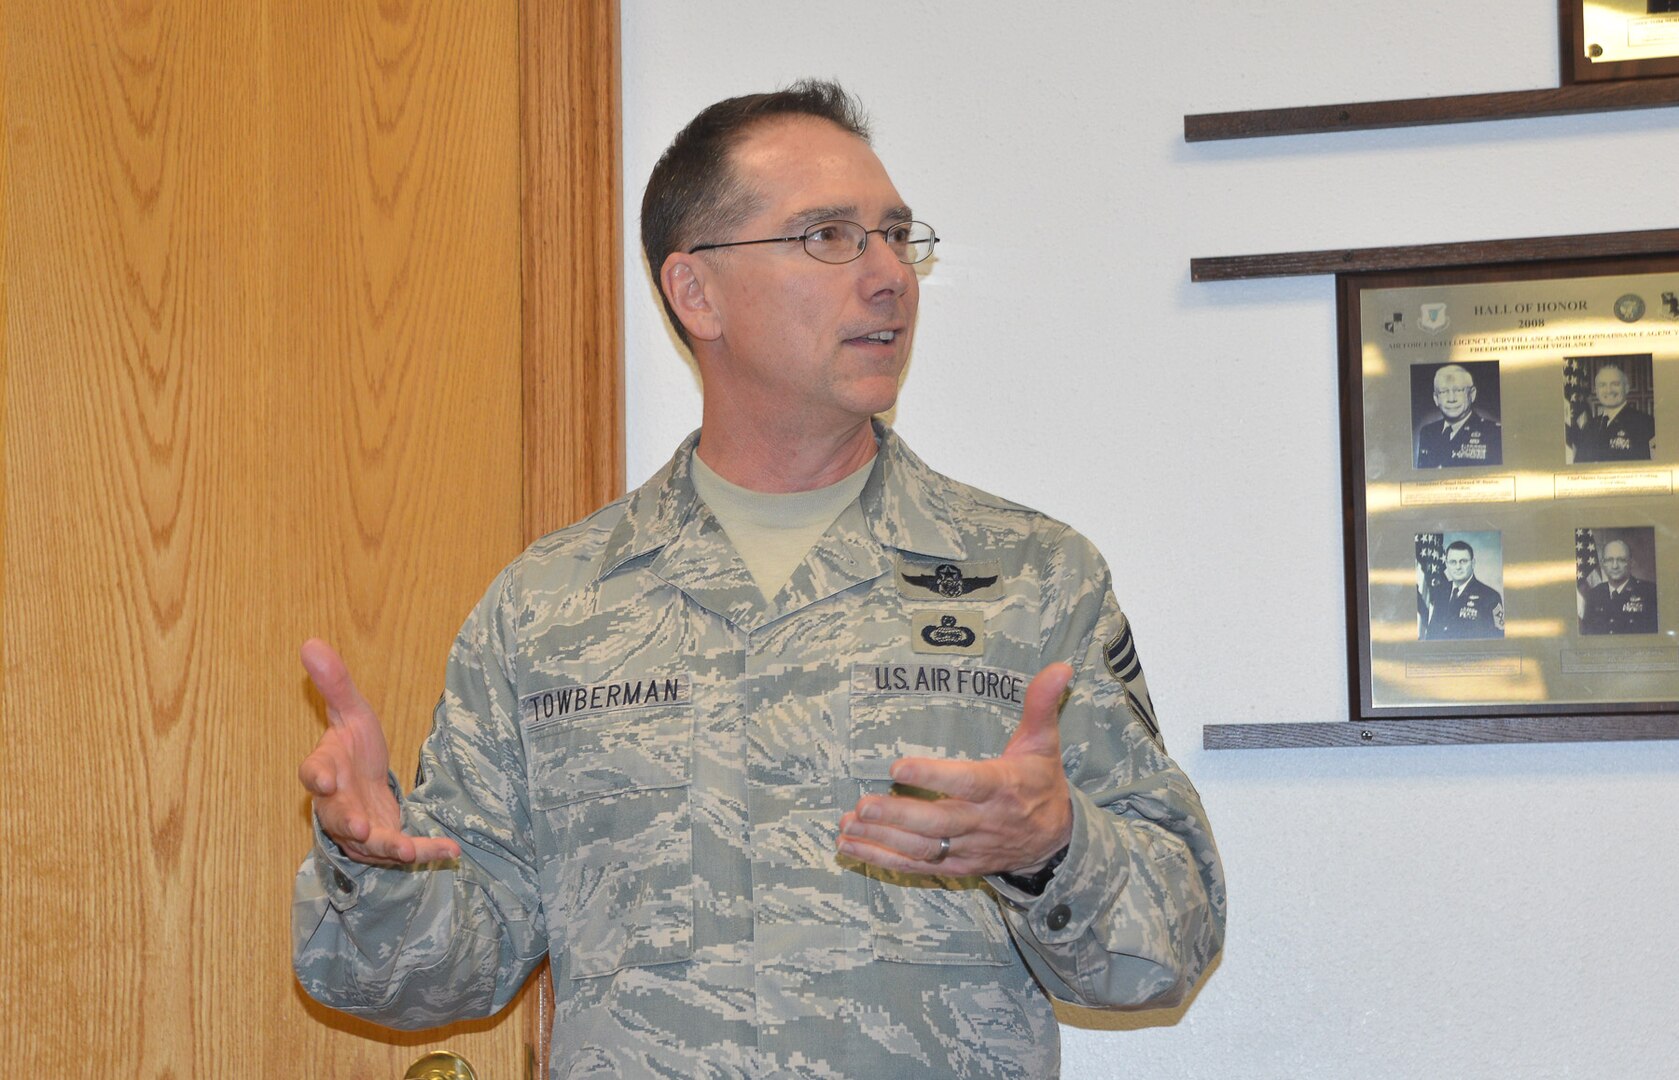 Chief Master Sgt. Roger Towberman, former command chief, 25th Air Force, speaks to Airmen July 27 as he prepares to depart for his new assignment at the Pentagon.